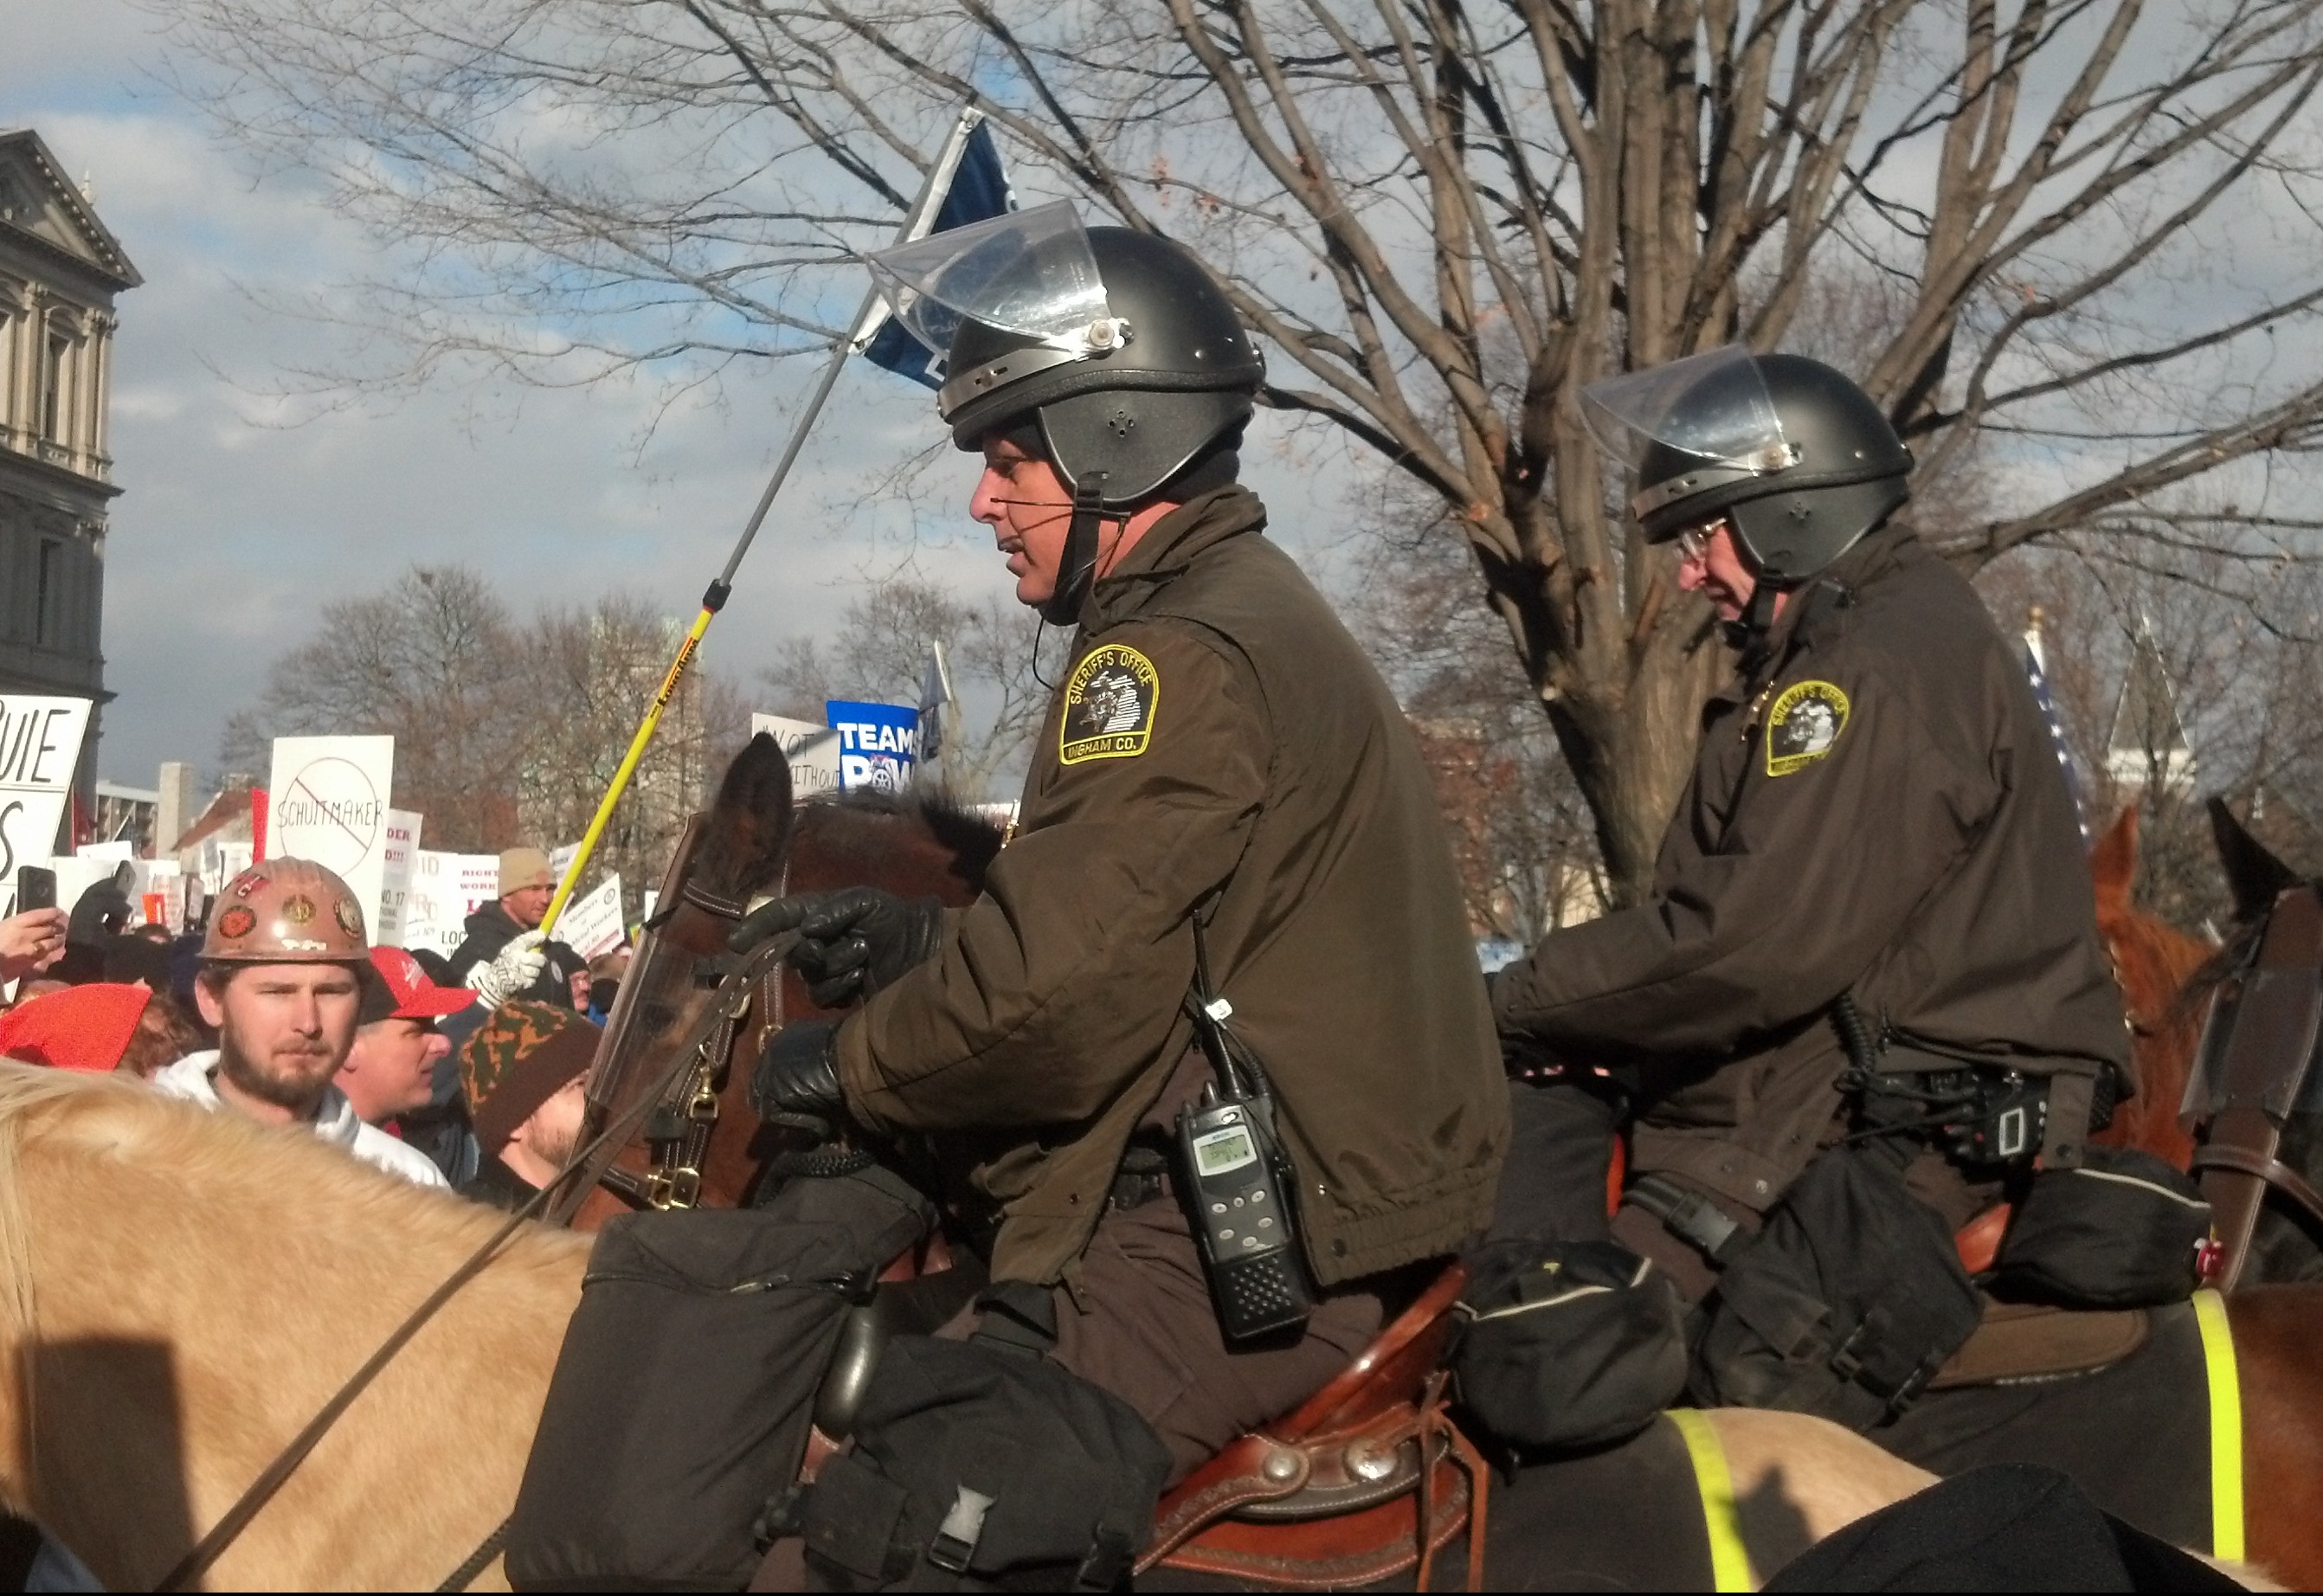 Mounted police in riot gear are seen among right-to-work protesters. (credit: WWJ/Ron Dewey)